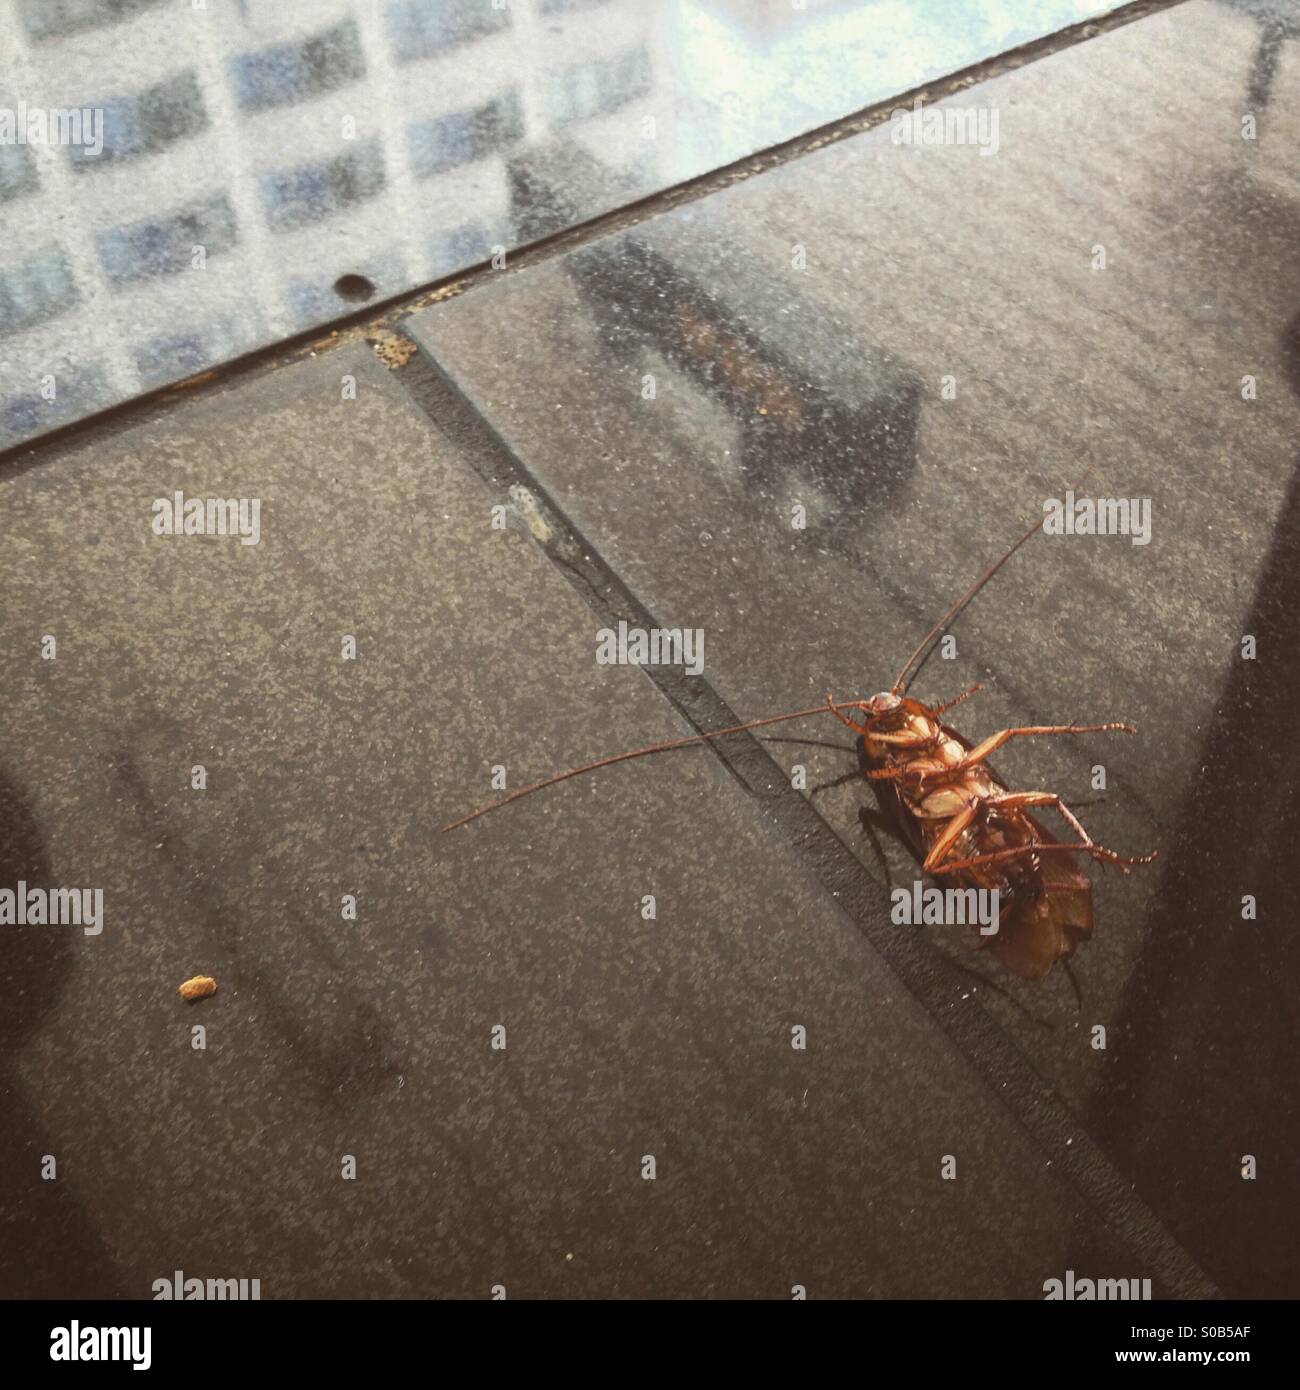 A cockroach dead on the ground Stock Photo